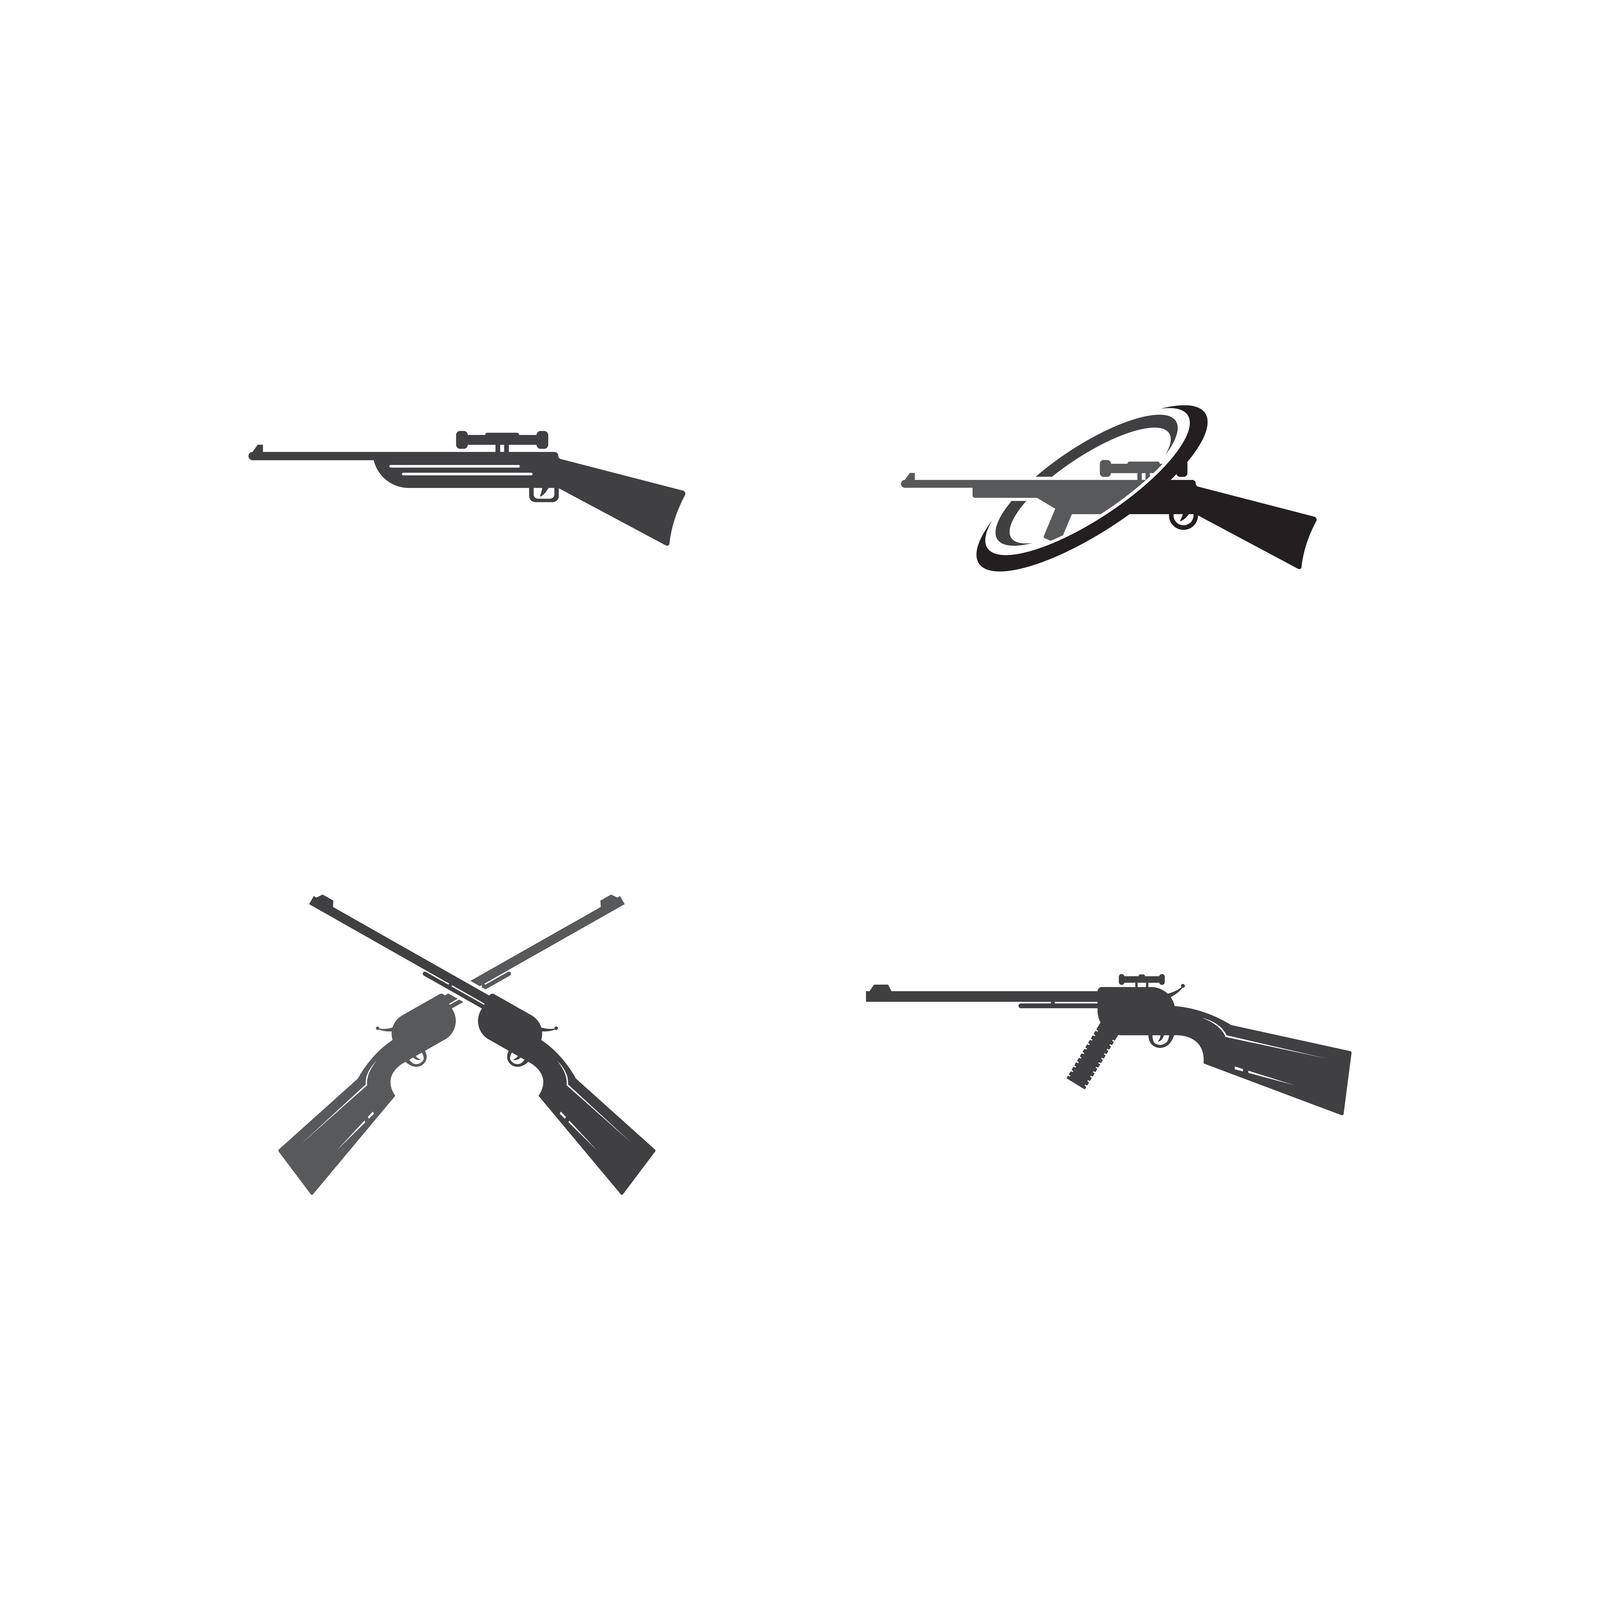 Sniper hunting rifle icons . Simple of sniper hunting rifle vector icons for web design on white background